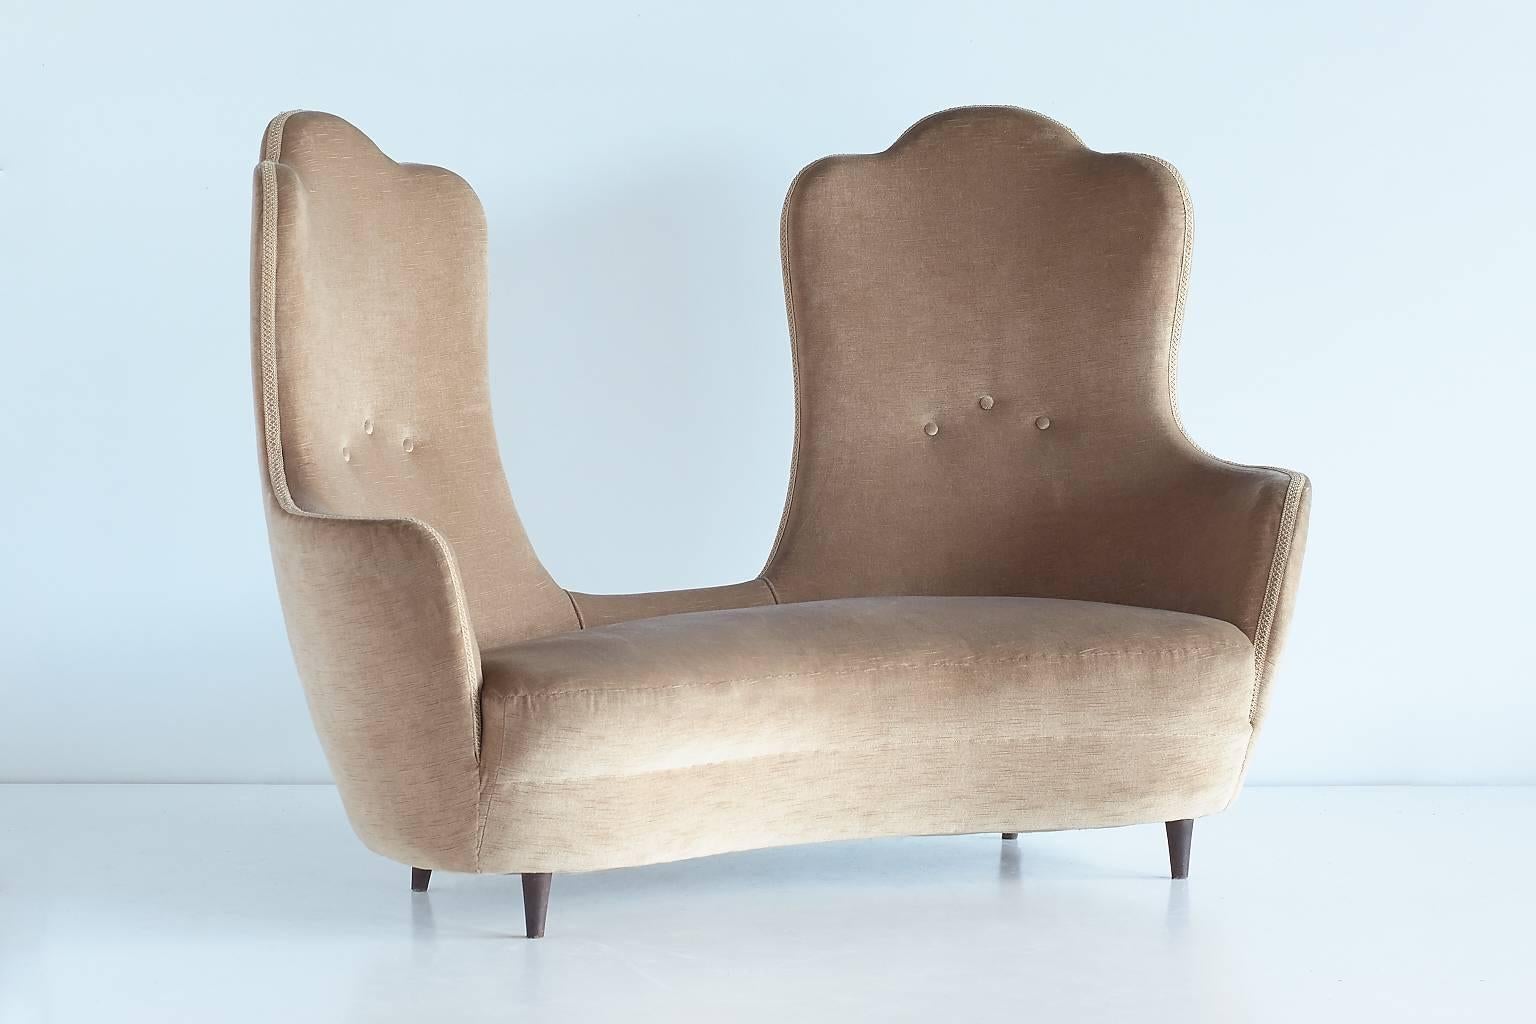 A striking variation on the conversation sofa, this curved Maurizio Tempestini design consists of two slightly inward placed backrests and a rounded seat. When seated, one is positioned towards the other, creating an intimate space for two. This